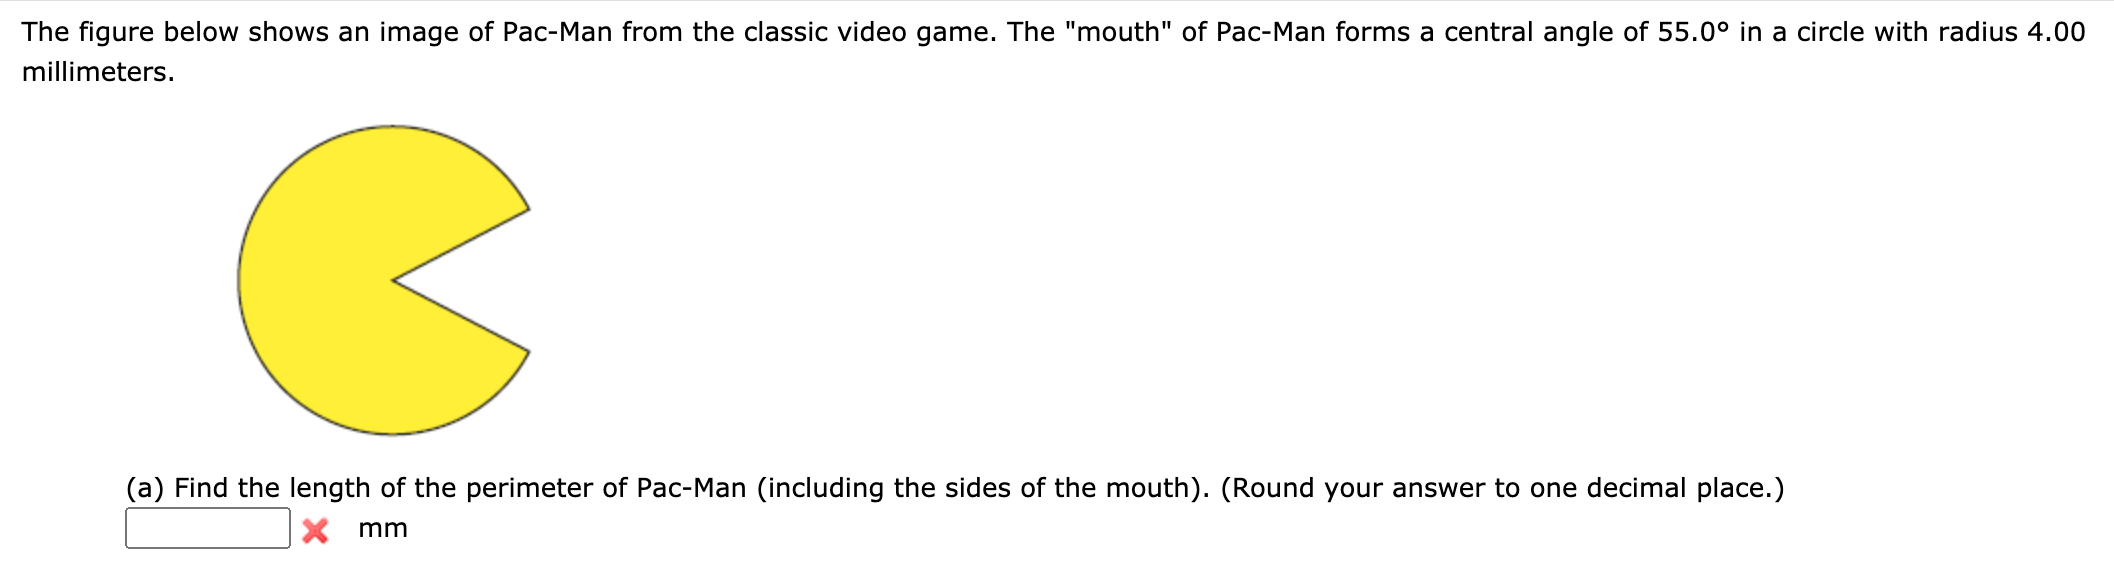 The figure below shows an image of Pac-Man from the classic video game. The "mouth" of Pac-Man forms a central angle of 55.0° in a circle with radius 4.00
millimeters.
(a) Find the length of the perimeter of Pac-Man (including the sides of the mouth). (Round your answer to one decimal place.)
